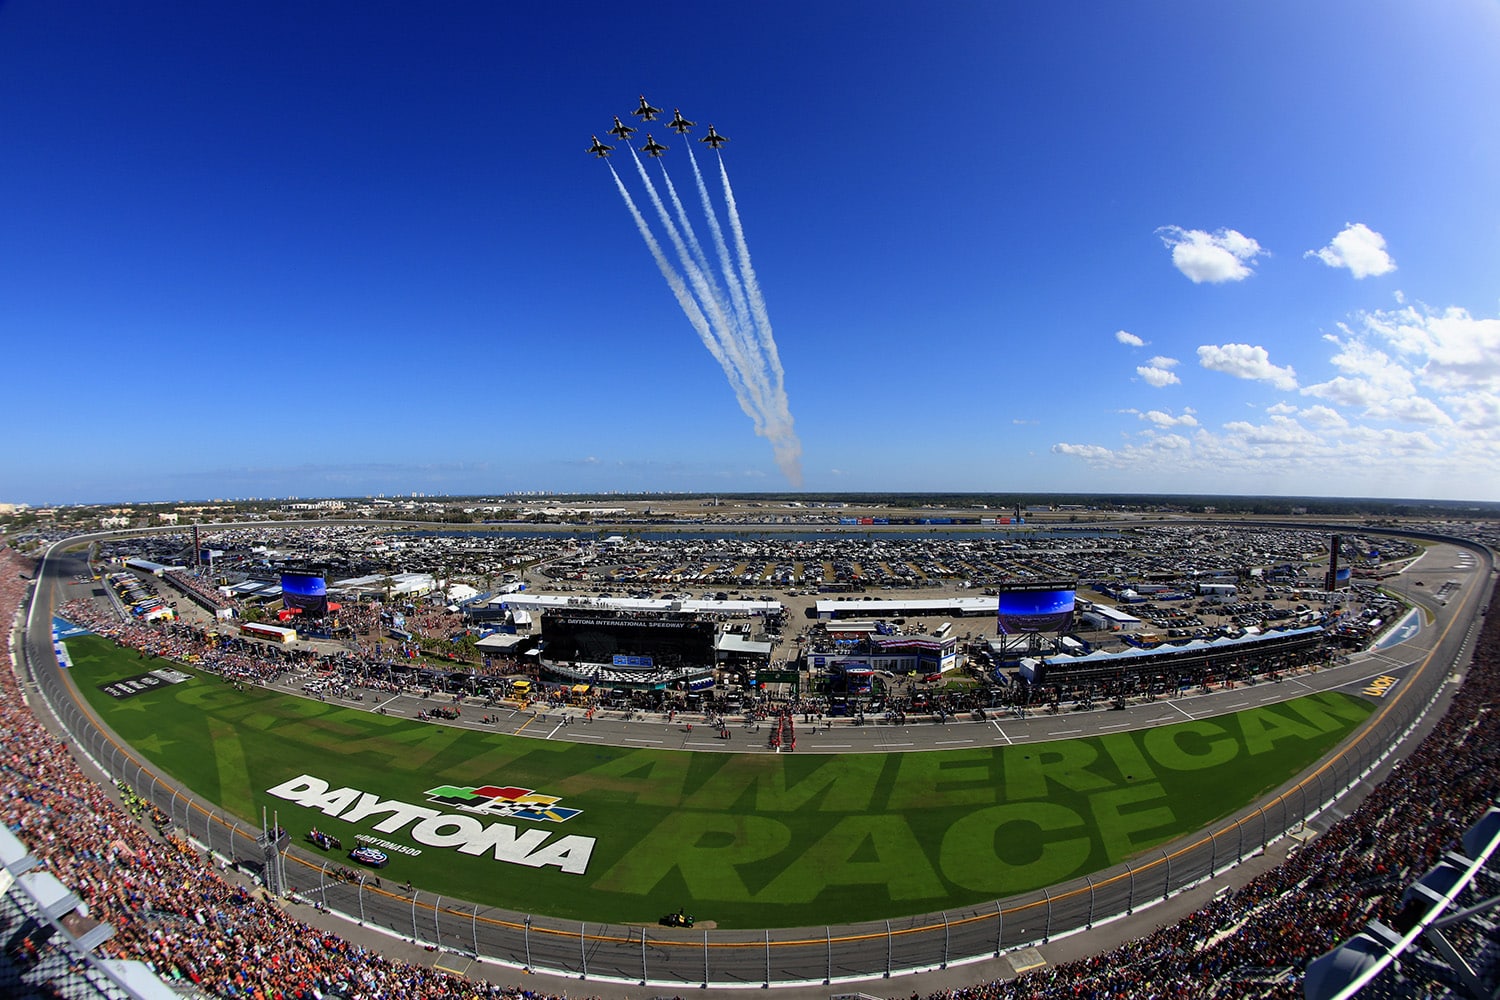 A view of the crowd, track, and fighter jet flyover before the Daytona 500.